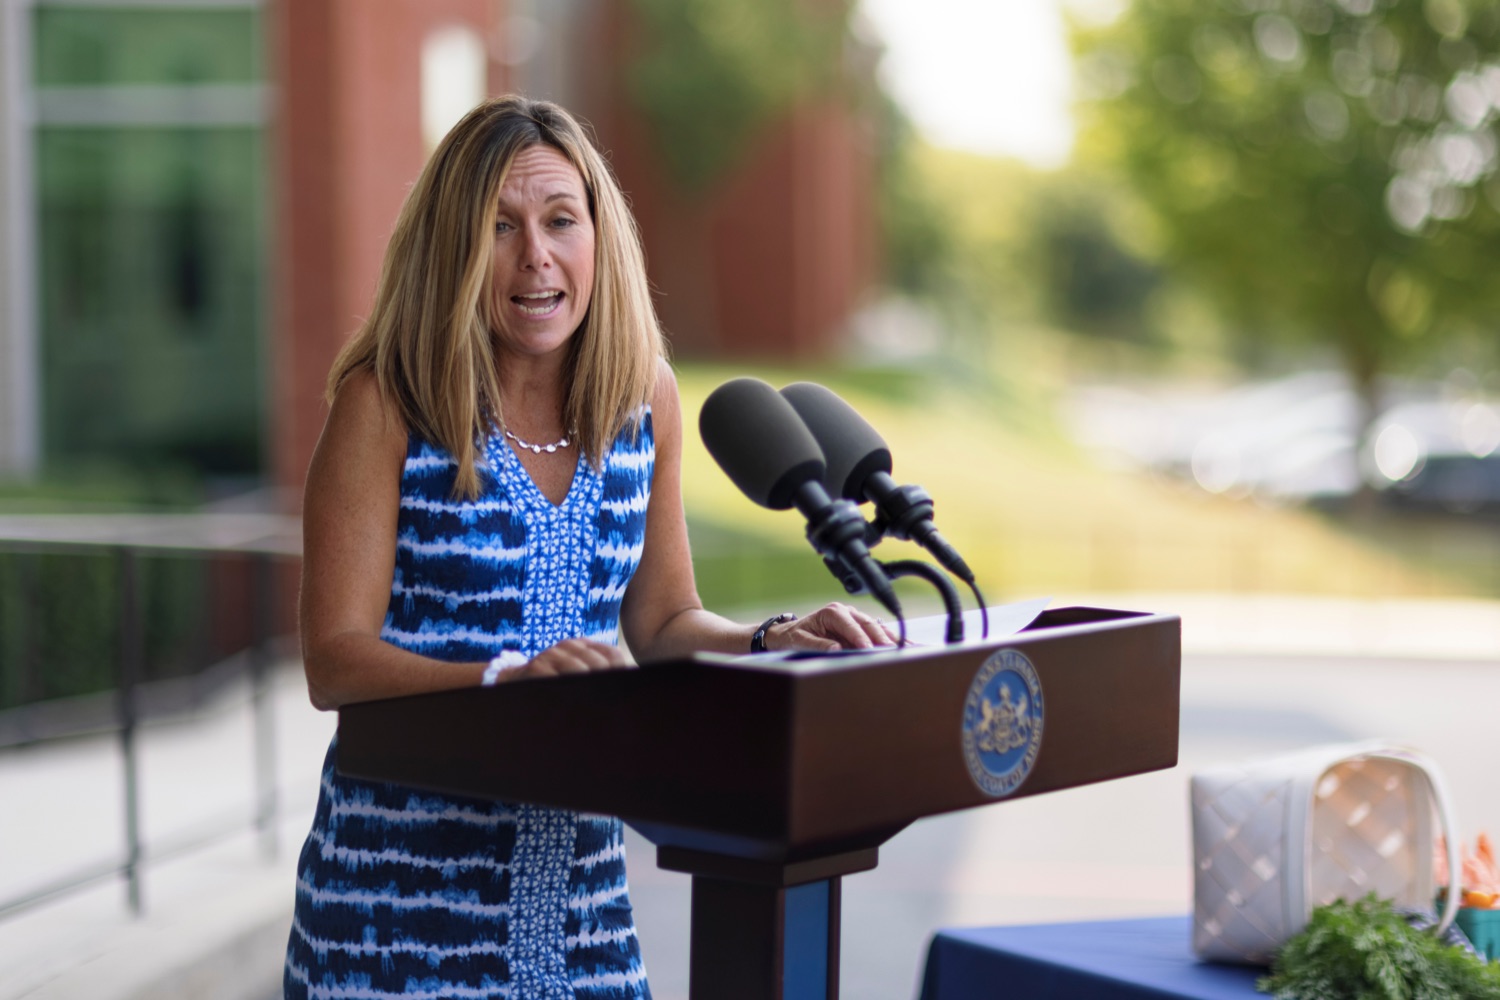 Vonda Ramp, PA Dept. of Education director of Childhood Nutrition Programs, speaks during a press conference, which highlighted the success of Pennsylvania's farm to school programs, at Hill Top Academy in Mechanicsburg on Friday, August 27, 2021.<br><a href="https://filesource.amperwave.net/commonwealthofpa/photo/19054_AGRIC_FarmToSchool_NK_016.jpg" target="_blank">⇣ Download Photo</a>